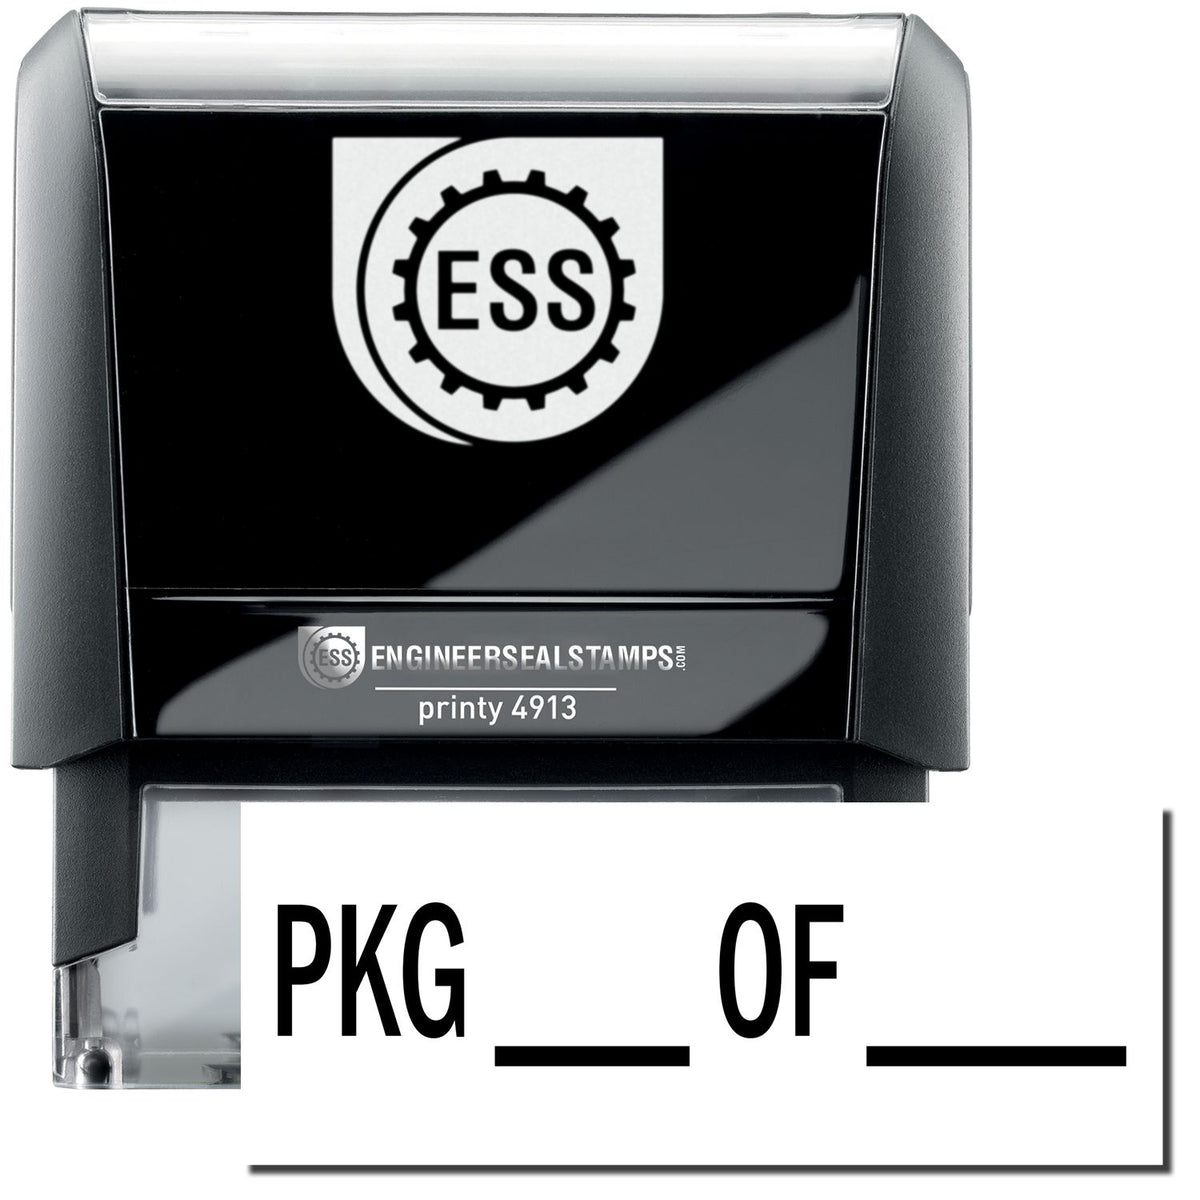 A self-inking stamp with a stamped image showing how the text &quot;PKG ___ OF ____&quot; in a large bold font is displayed by it.